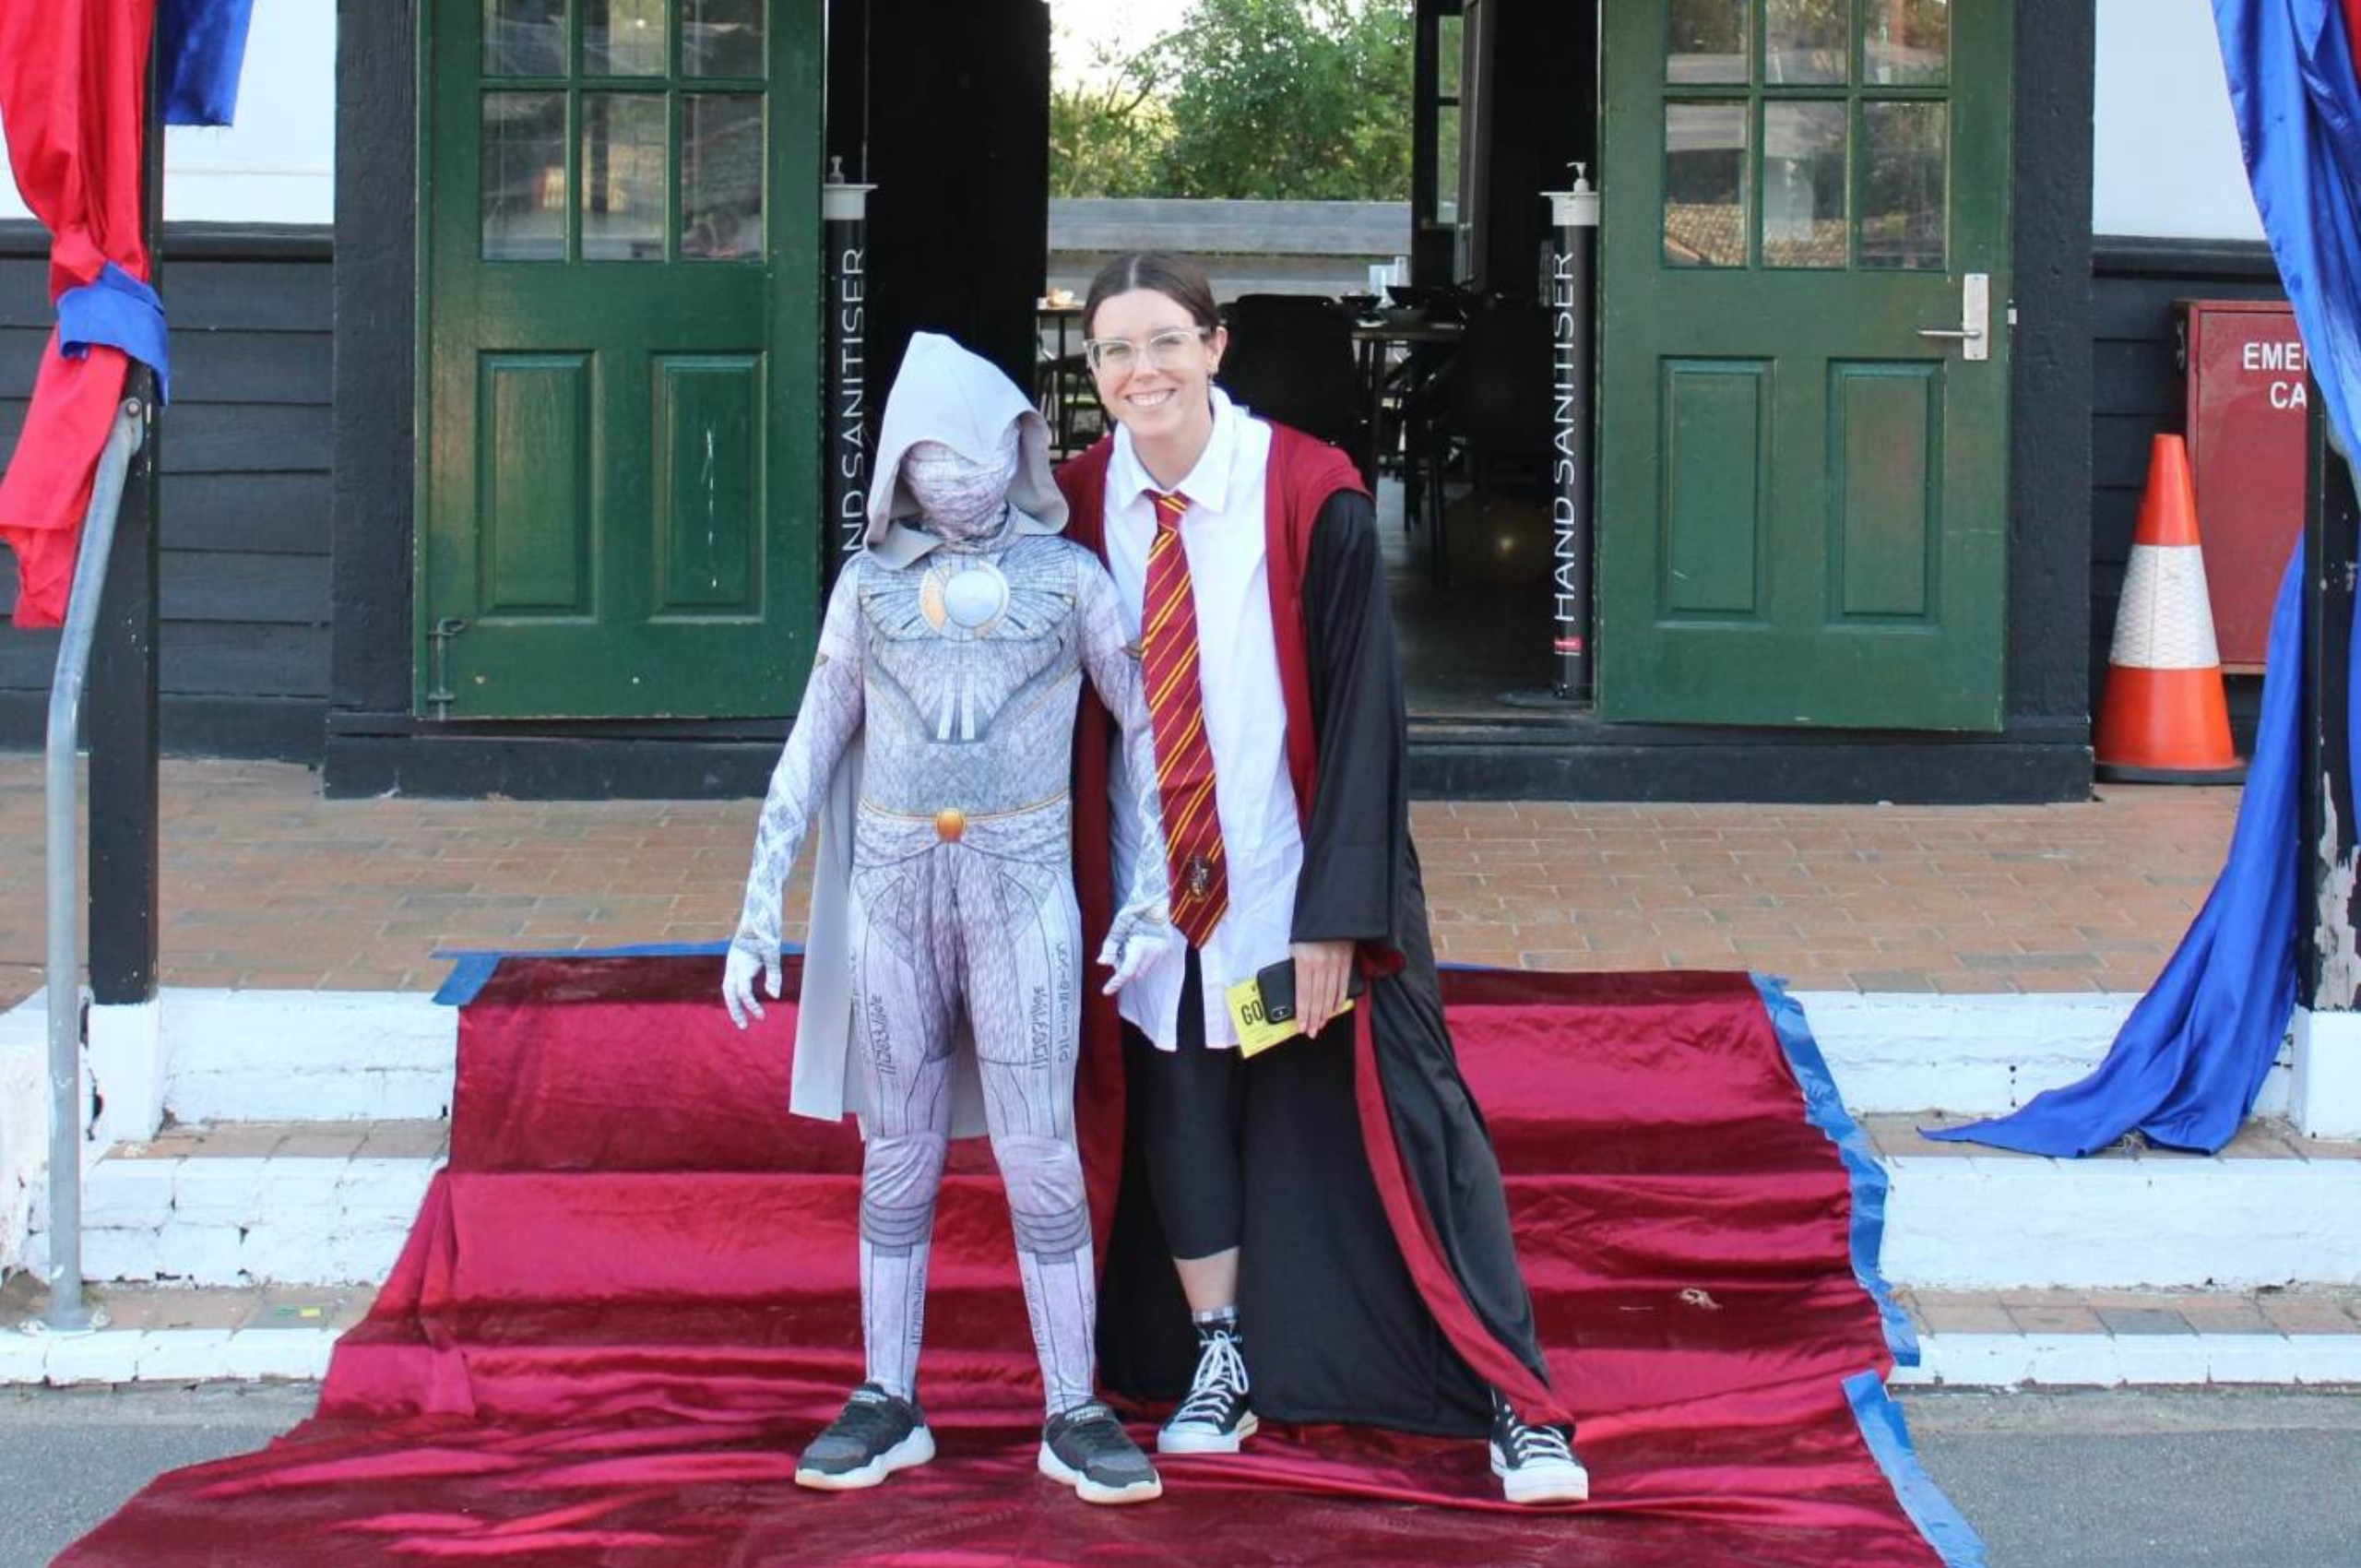 An adult woman and a young boy are standing on steps on a red carpet. They are dressed in Harry Potter costumes and smiling at the camera.